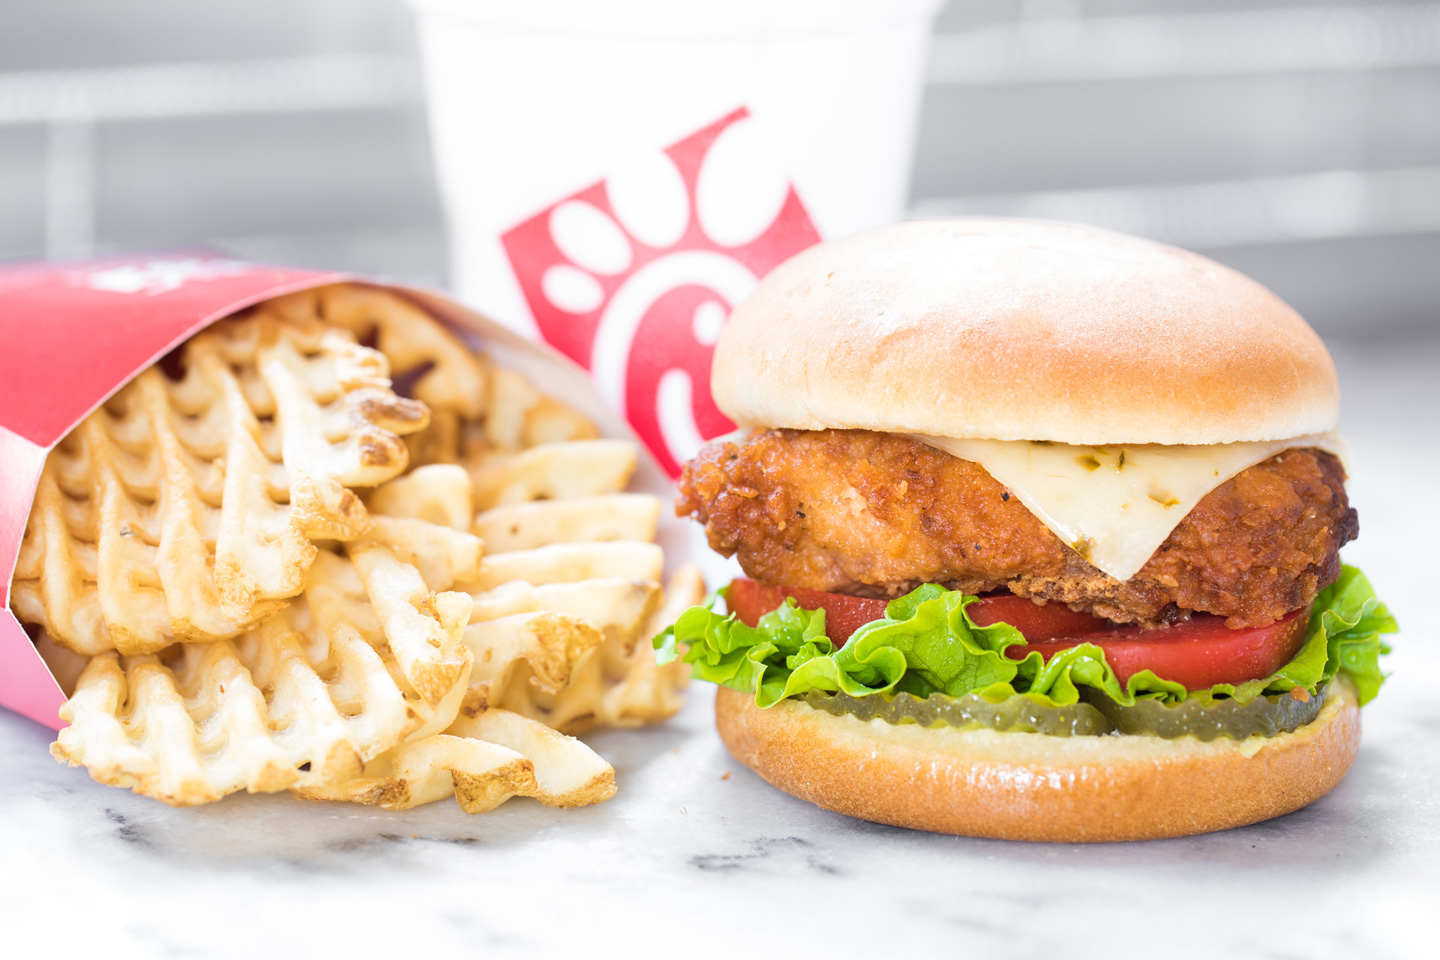 Spice Up Your Chick-fil-A With 5 Spicy Hacks | Chick-fil-A